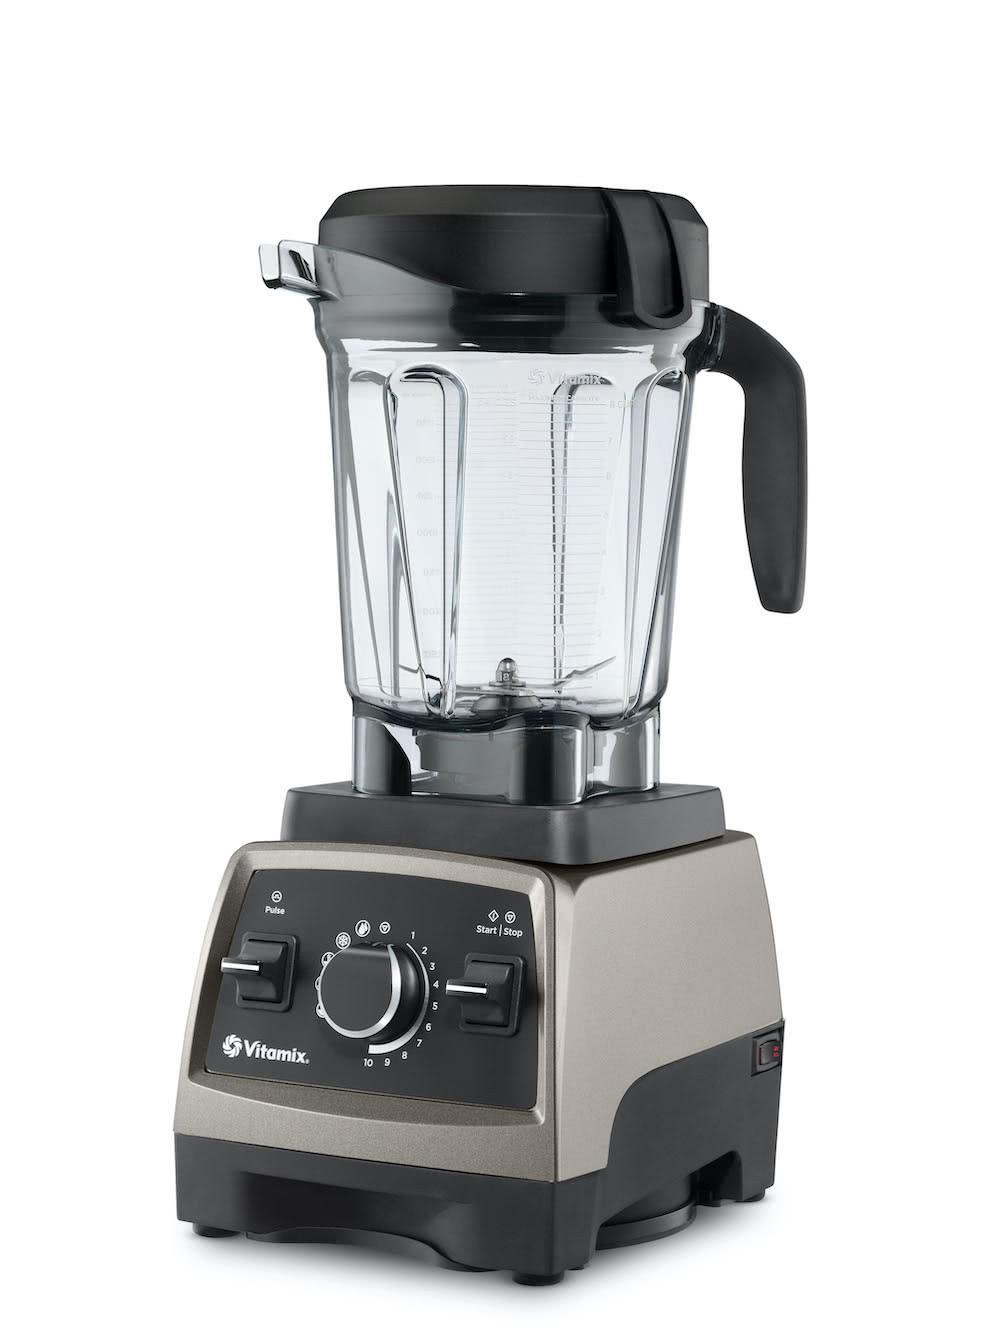  Genteen Blender for Smoothies,650W Smoothie Blenders for  Kitchen for Smoothies/Ice,Personal Blender with 2 BPA-Free Portable Blender  Bottles 17+24 OZ,Single Serve Mixer for Juices, Baby Food: Home & Kitchen